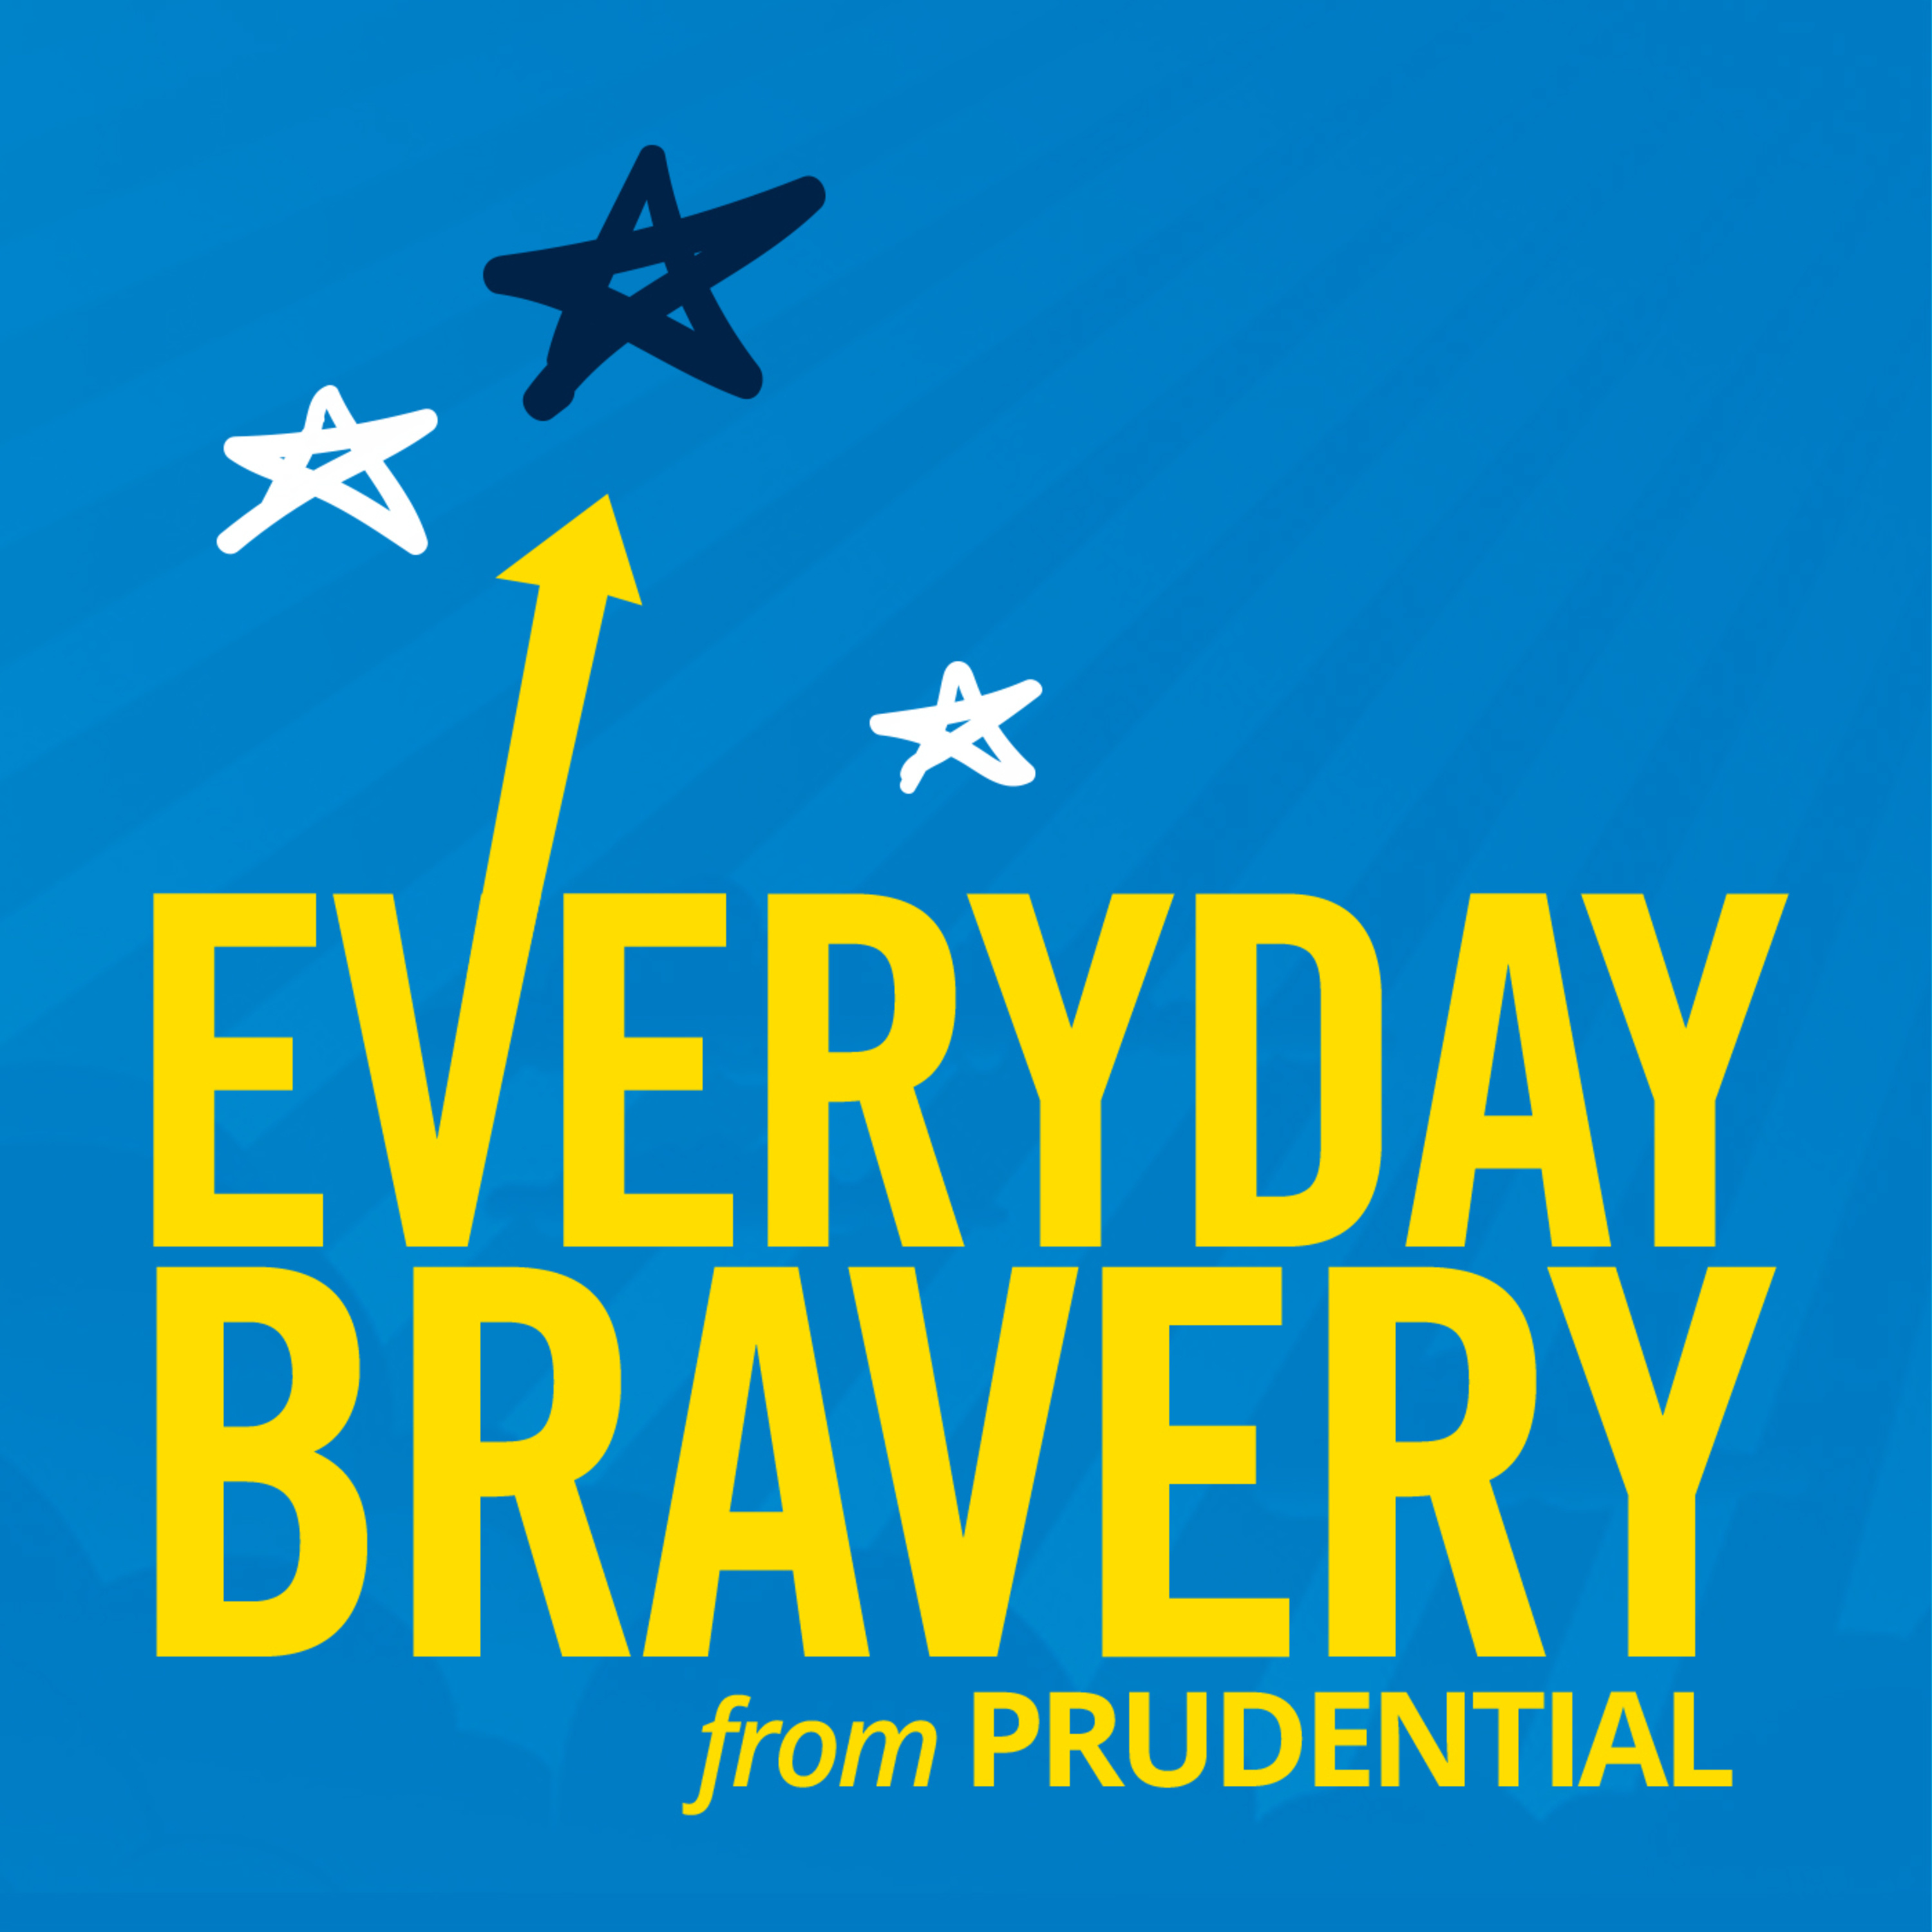 https://pacific-content.com/wp-content/uploads/2020/09/Everyday-Bravery.png